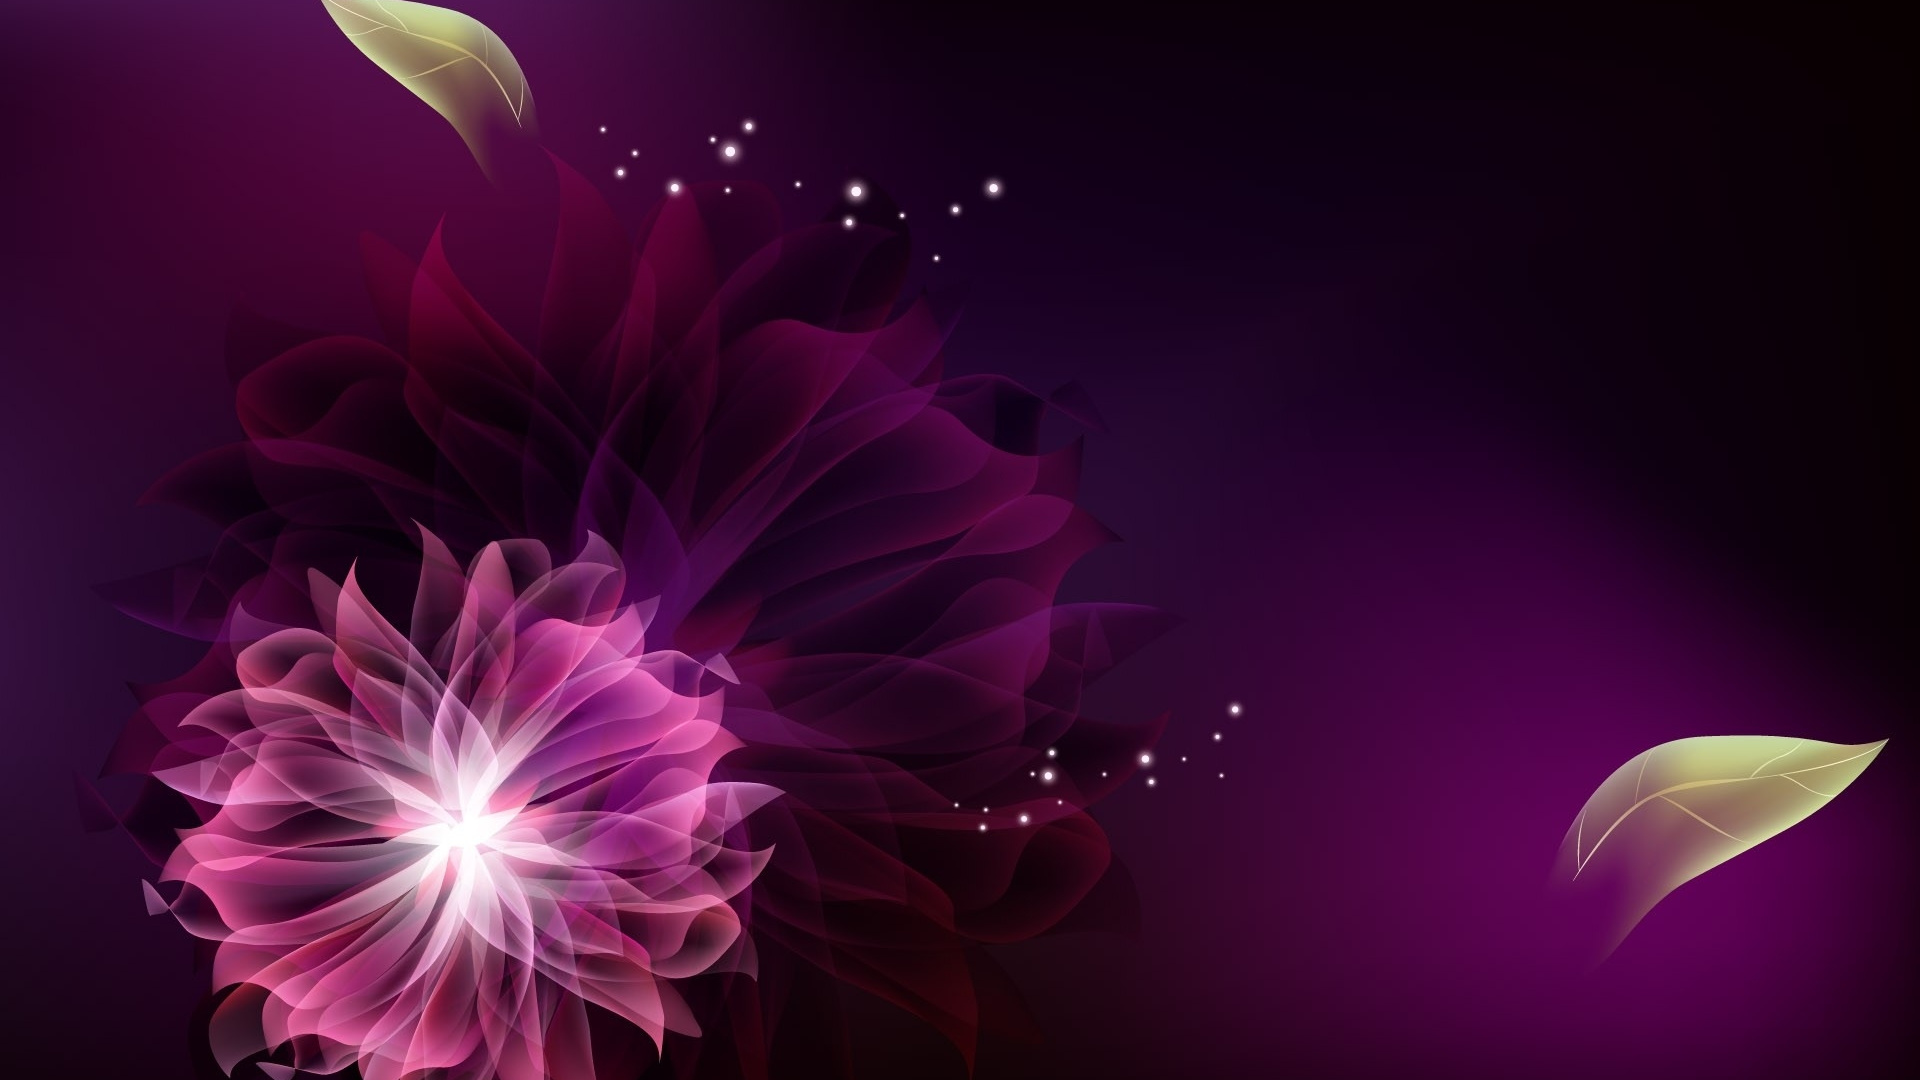 Pink and White Flower Illustration. Wallpaper in 1920x1080 Resolution